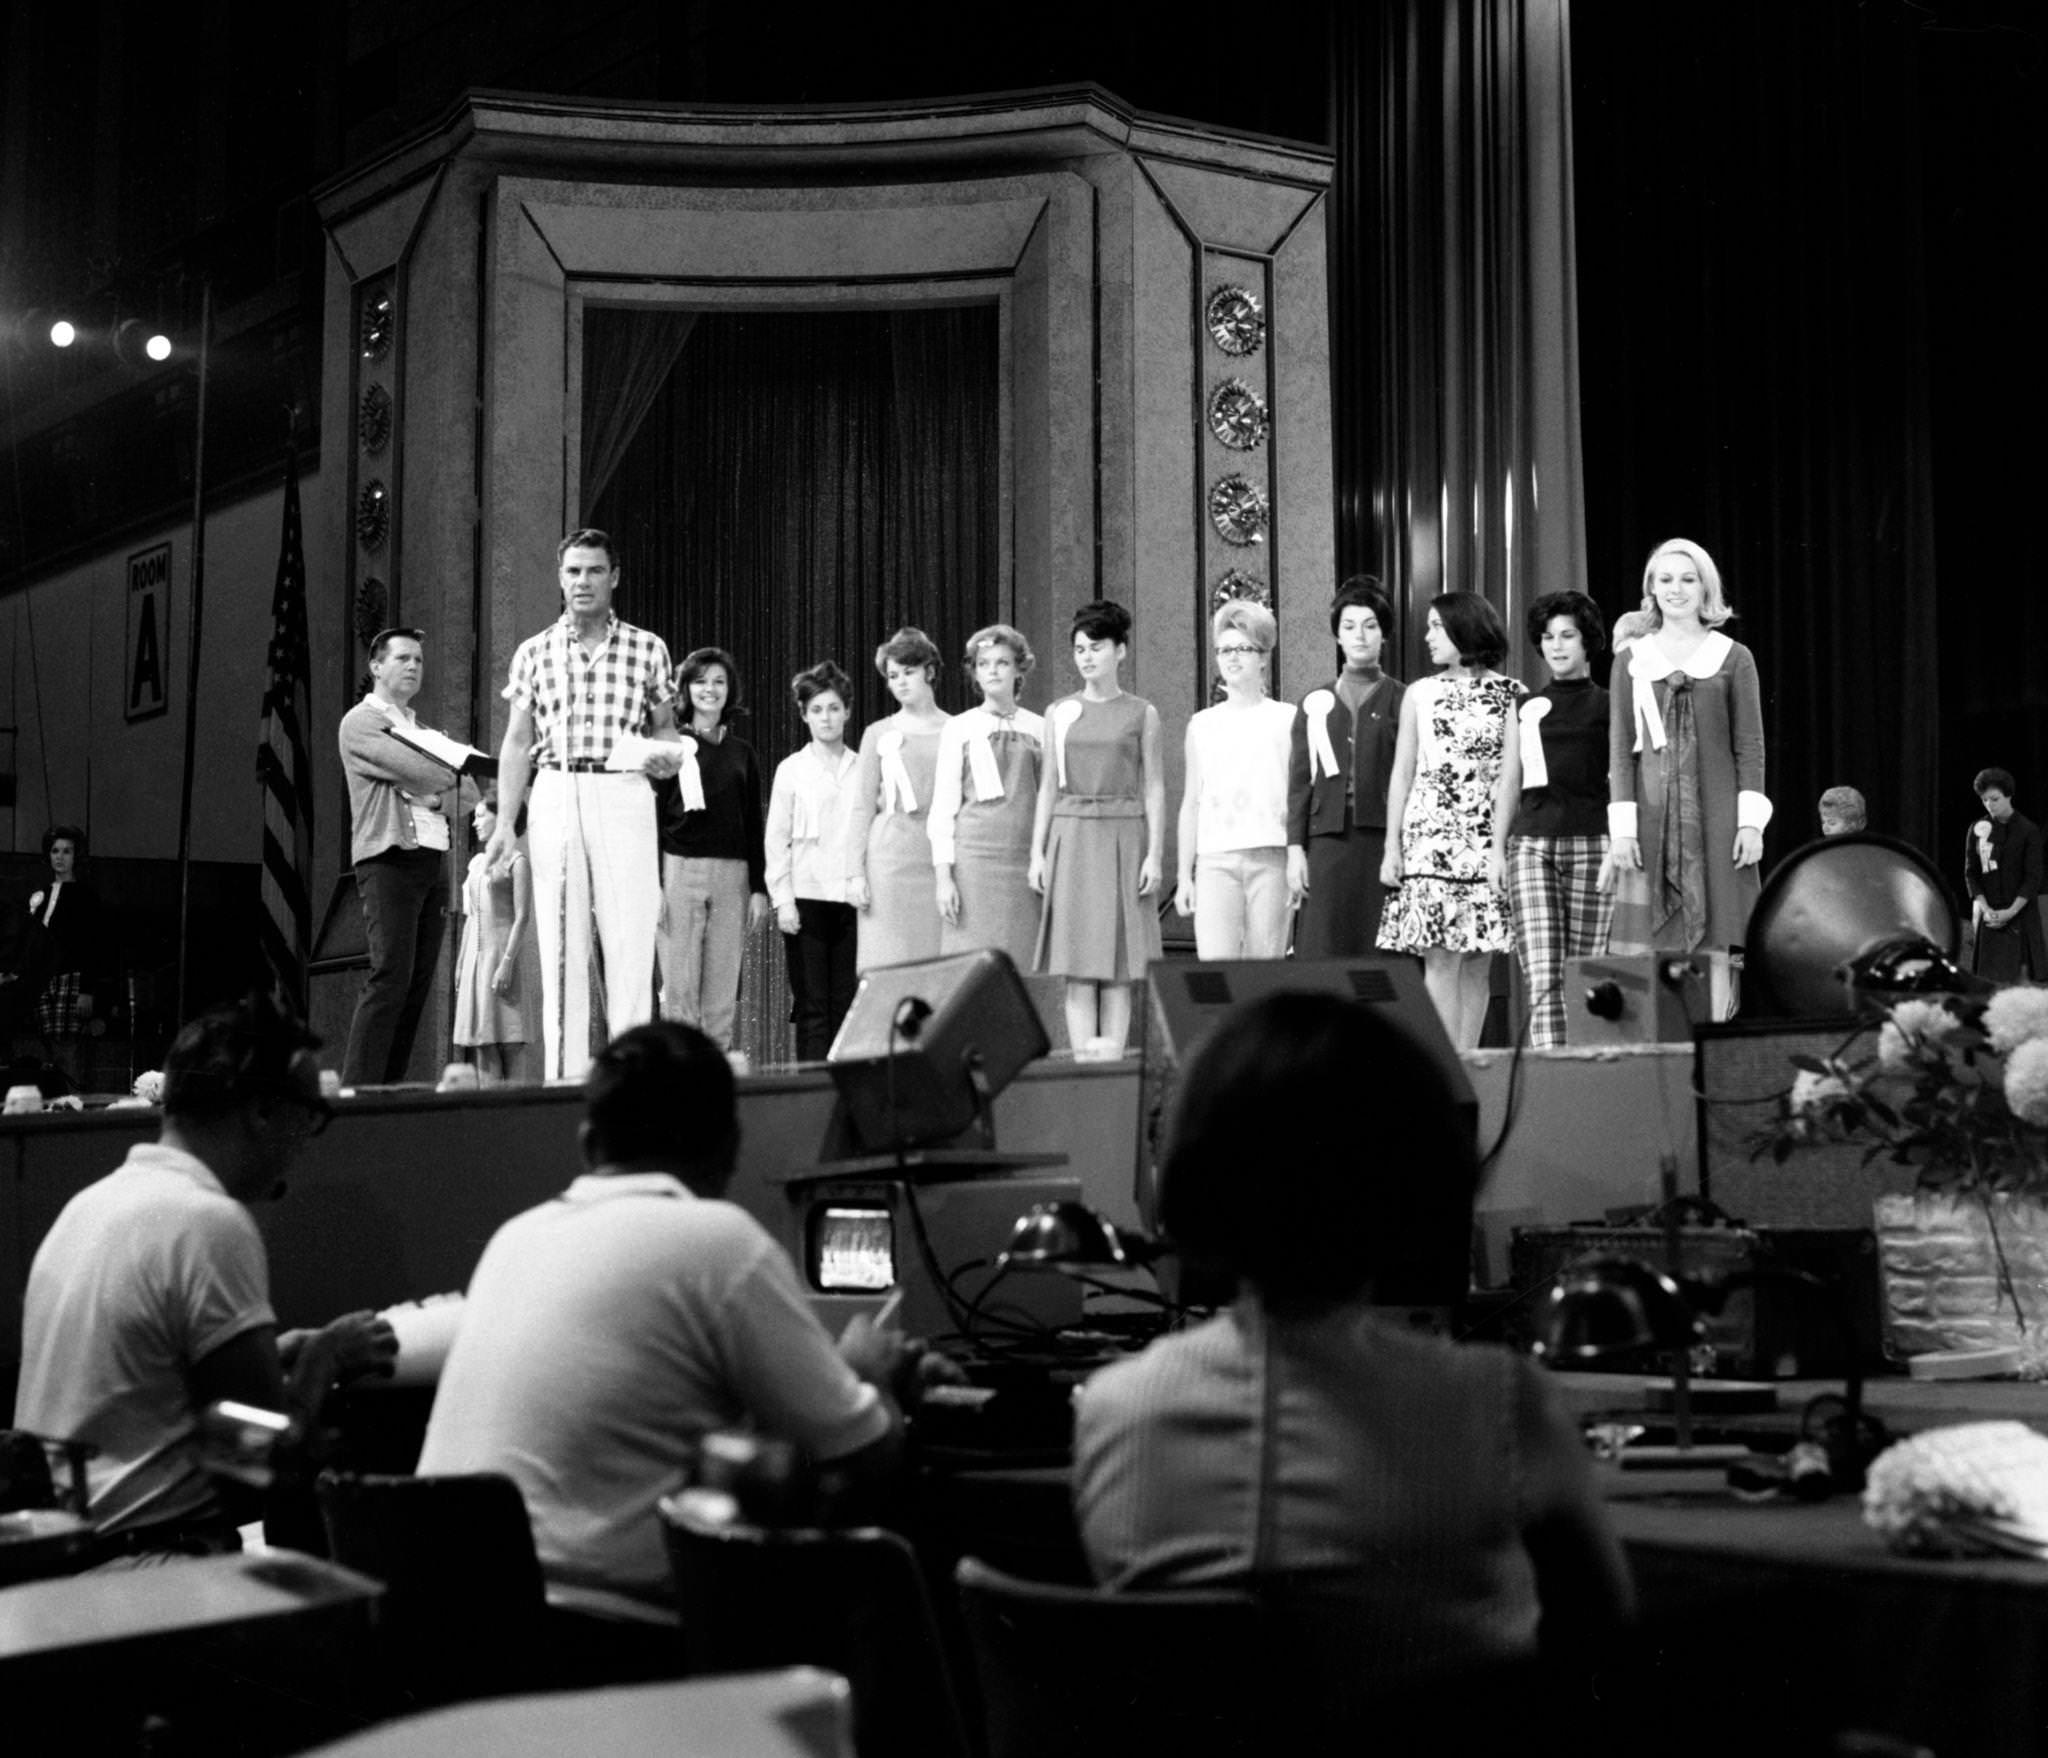 Miss America Pageant 1966 in Atlantic City.